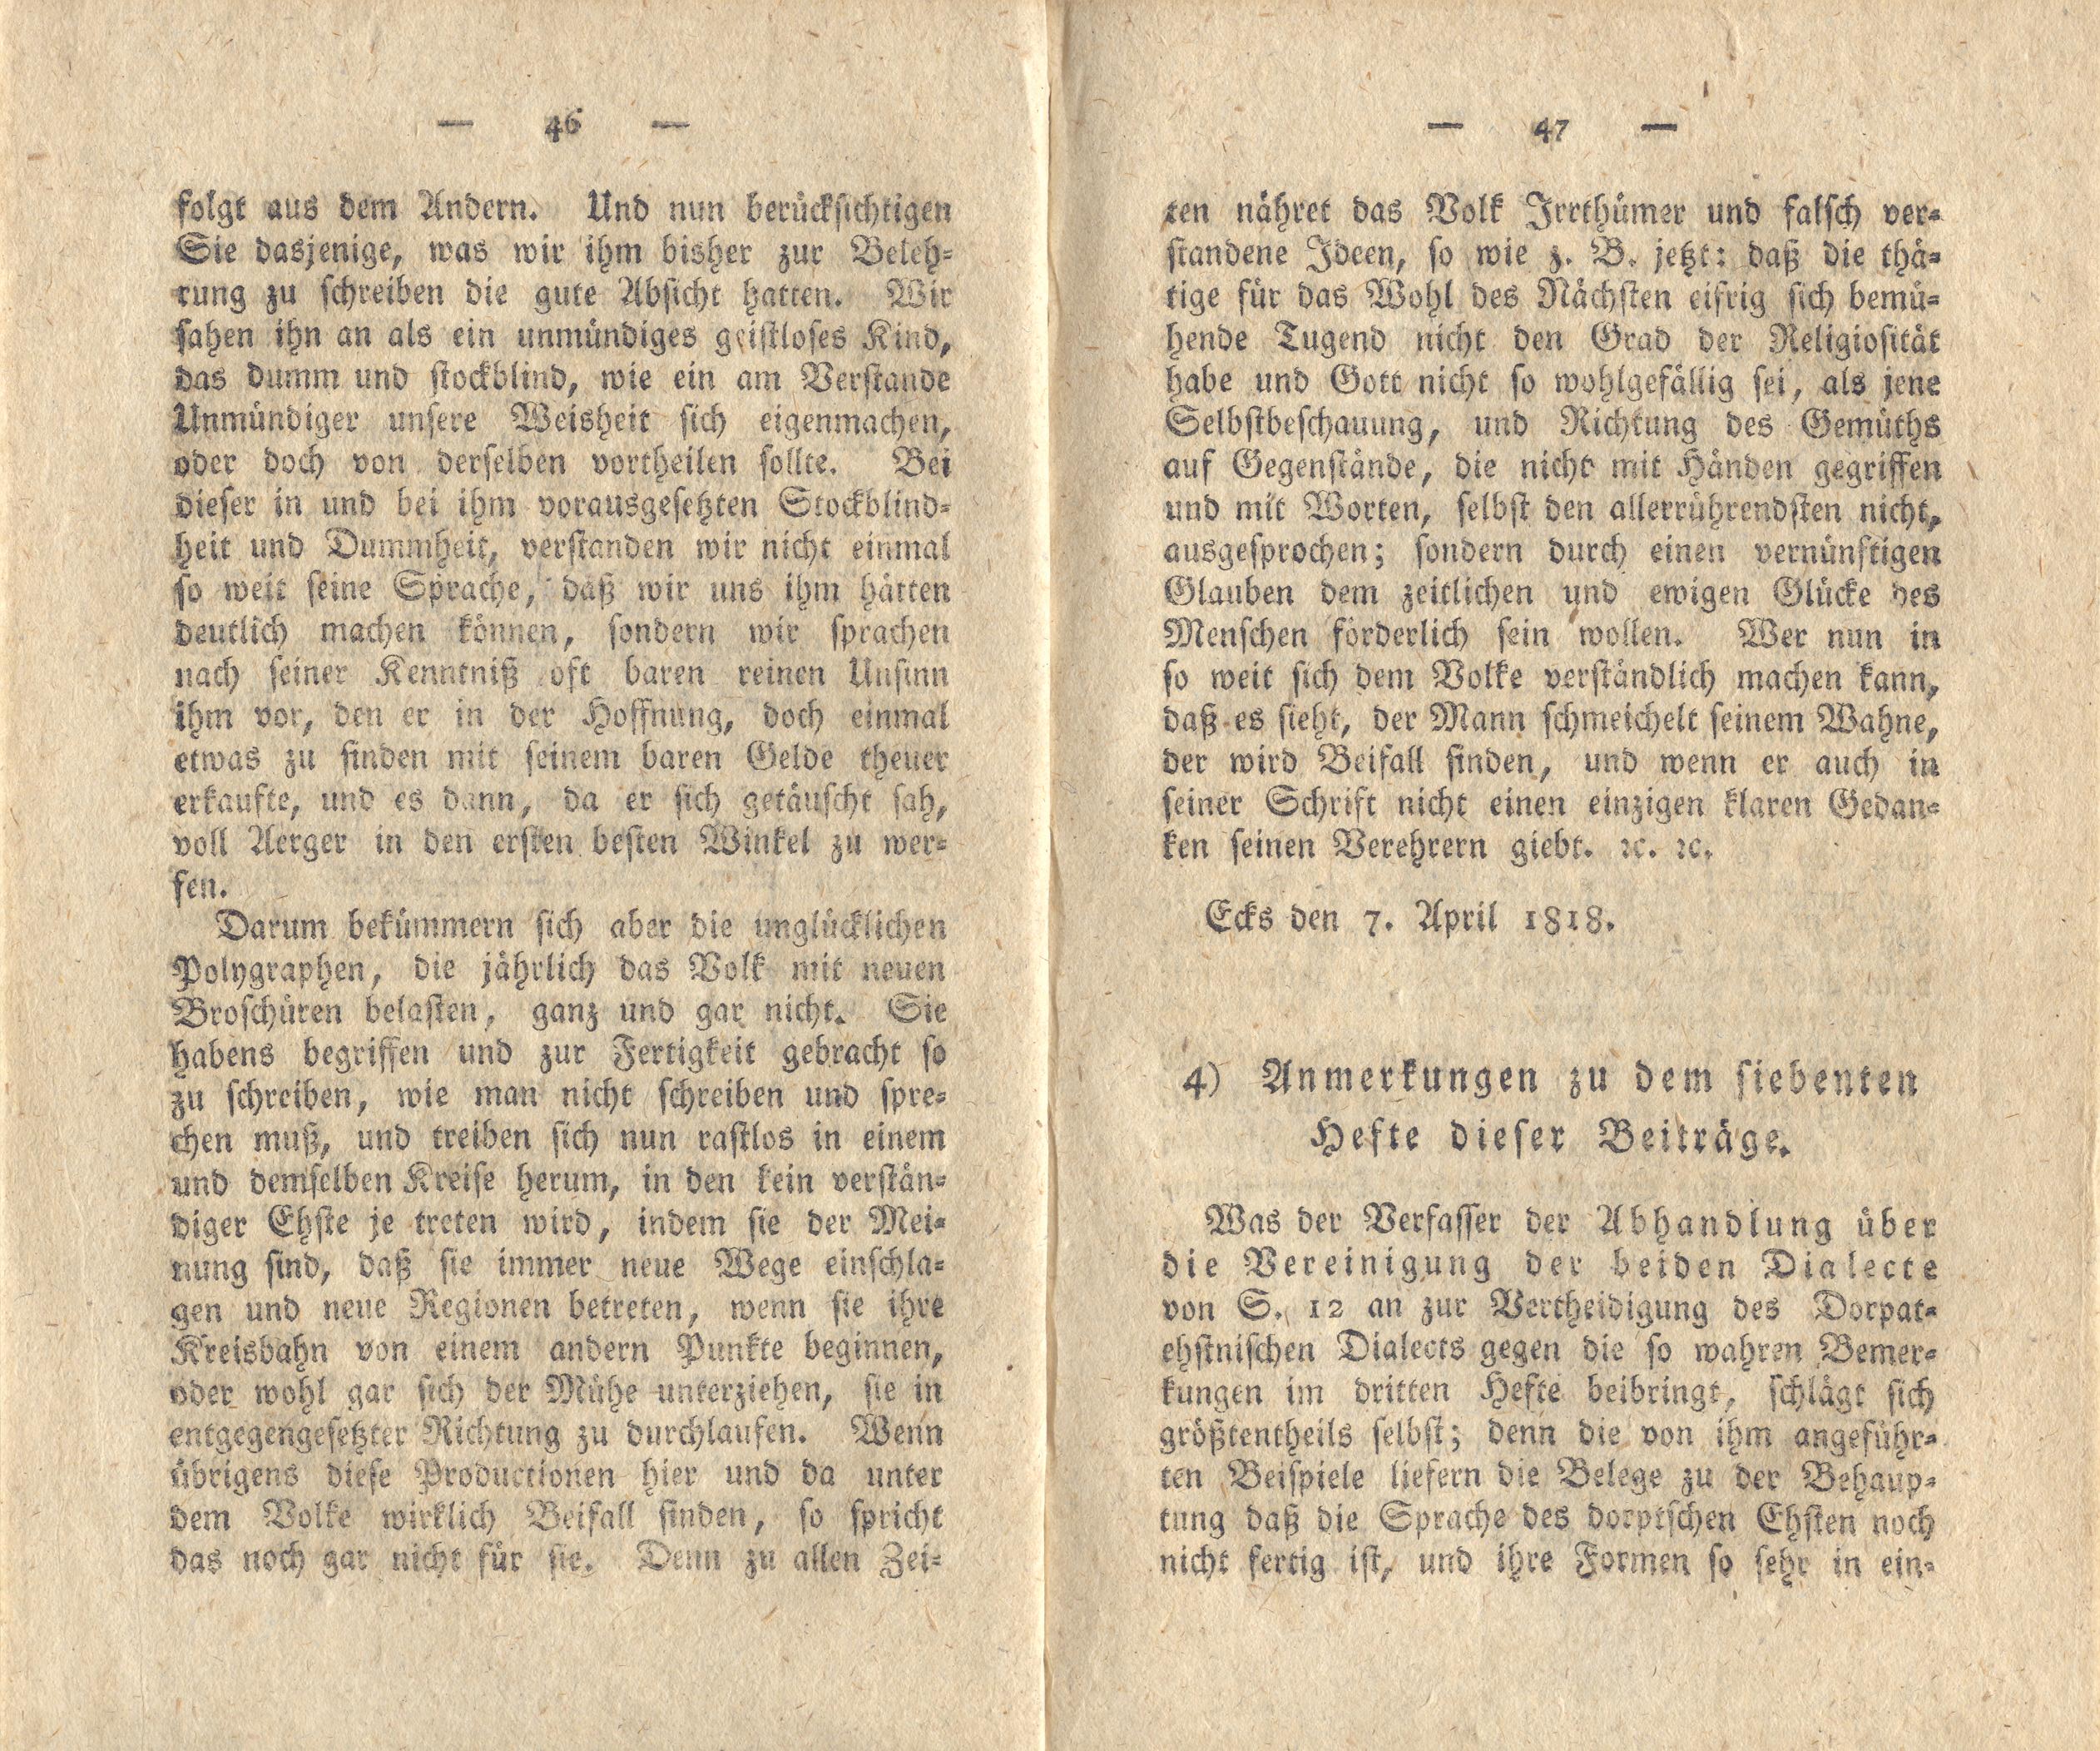 Beiträge [12] (1818) | 24. (46-47) Main body of text